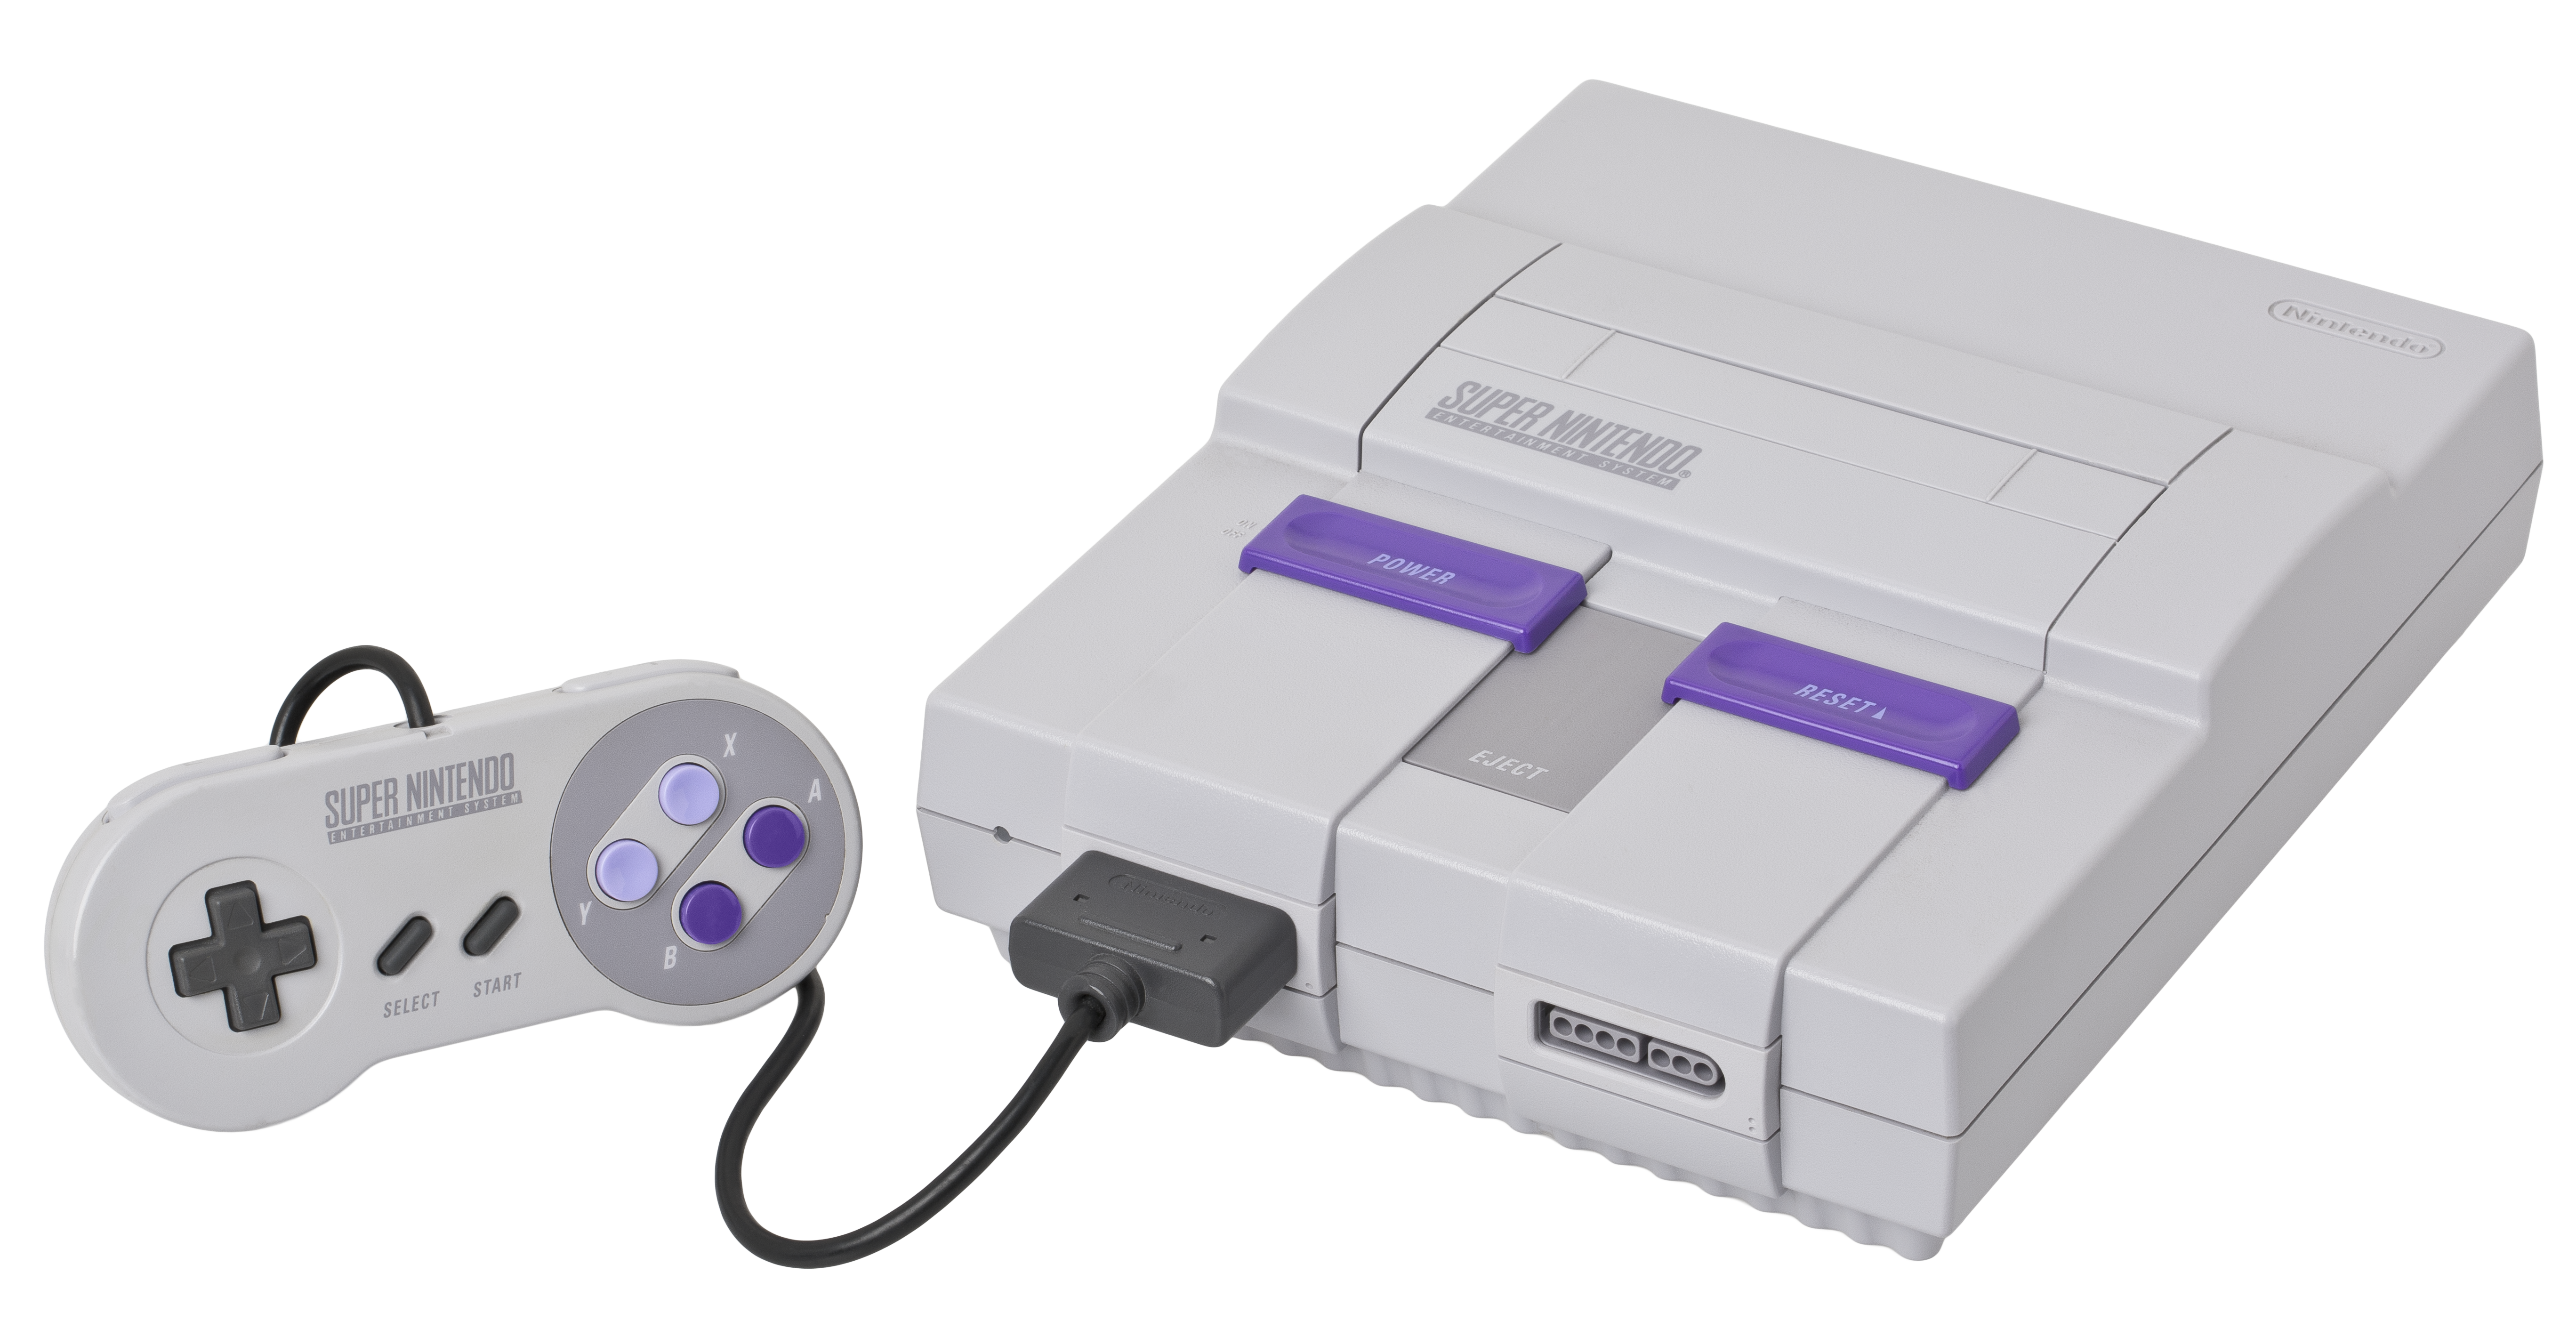 Picture of the Super Nintendo Entertainment System